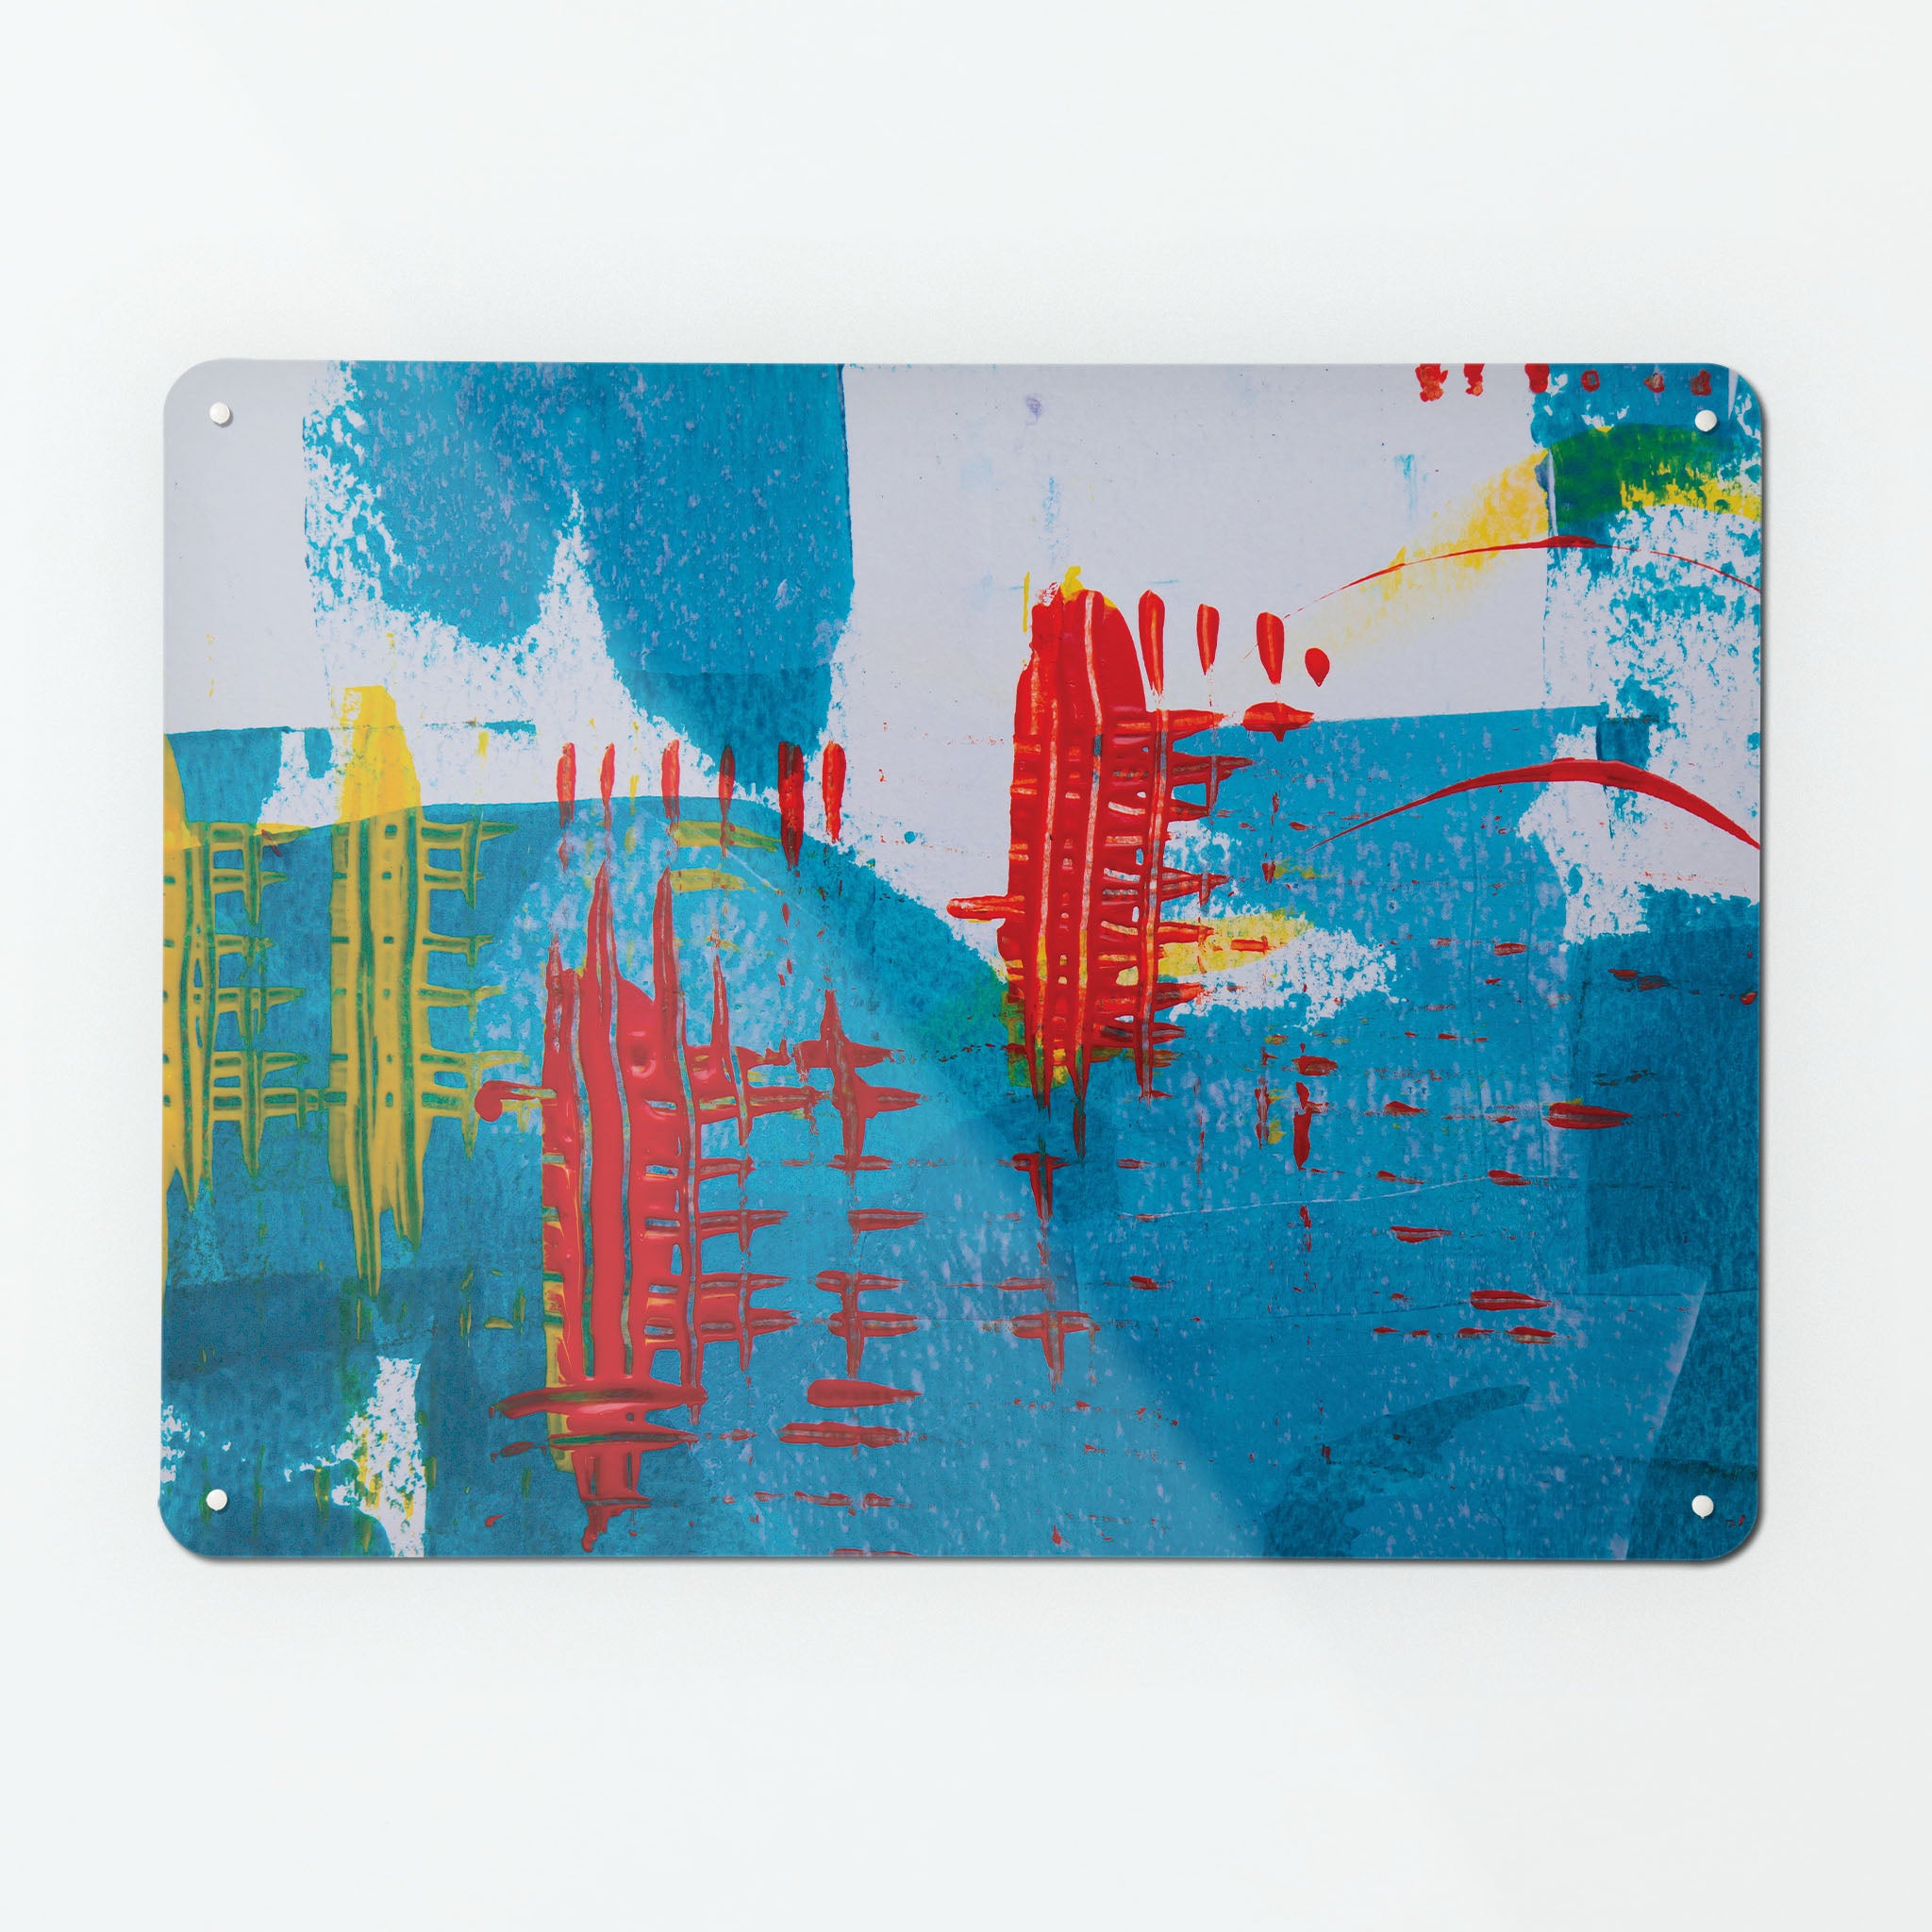 A large magnetic notice board by Beyond the Fridge with an image of an abstract painting titled Out of the Blue in blue, white, red and yellow